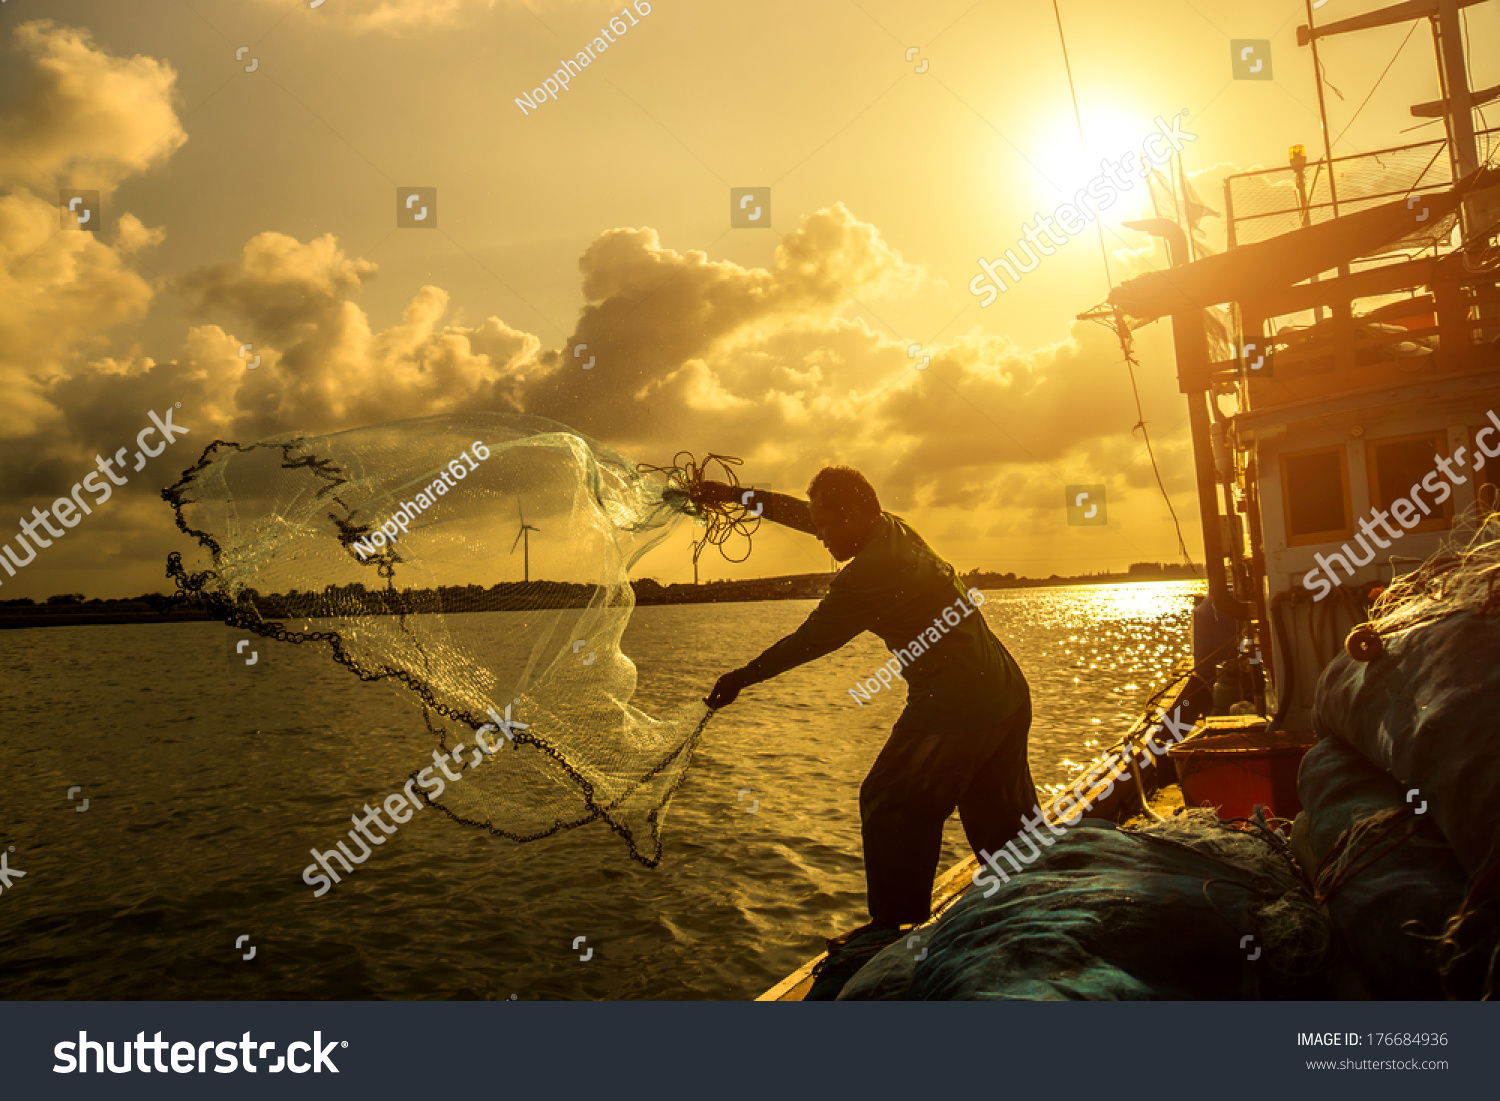 Silhouettes fisherman casting on a crab boat. #176684936